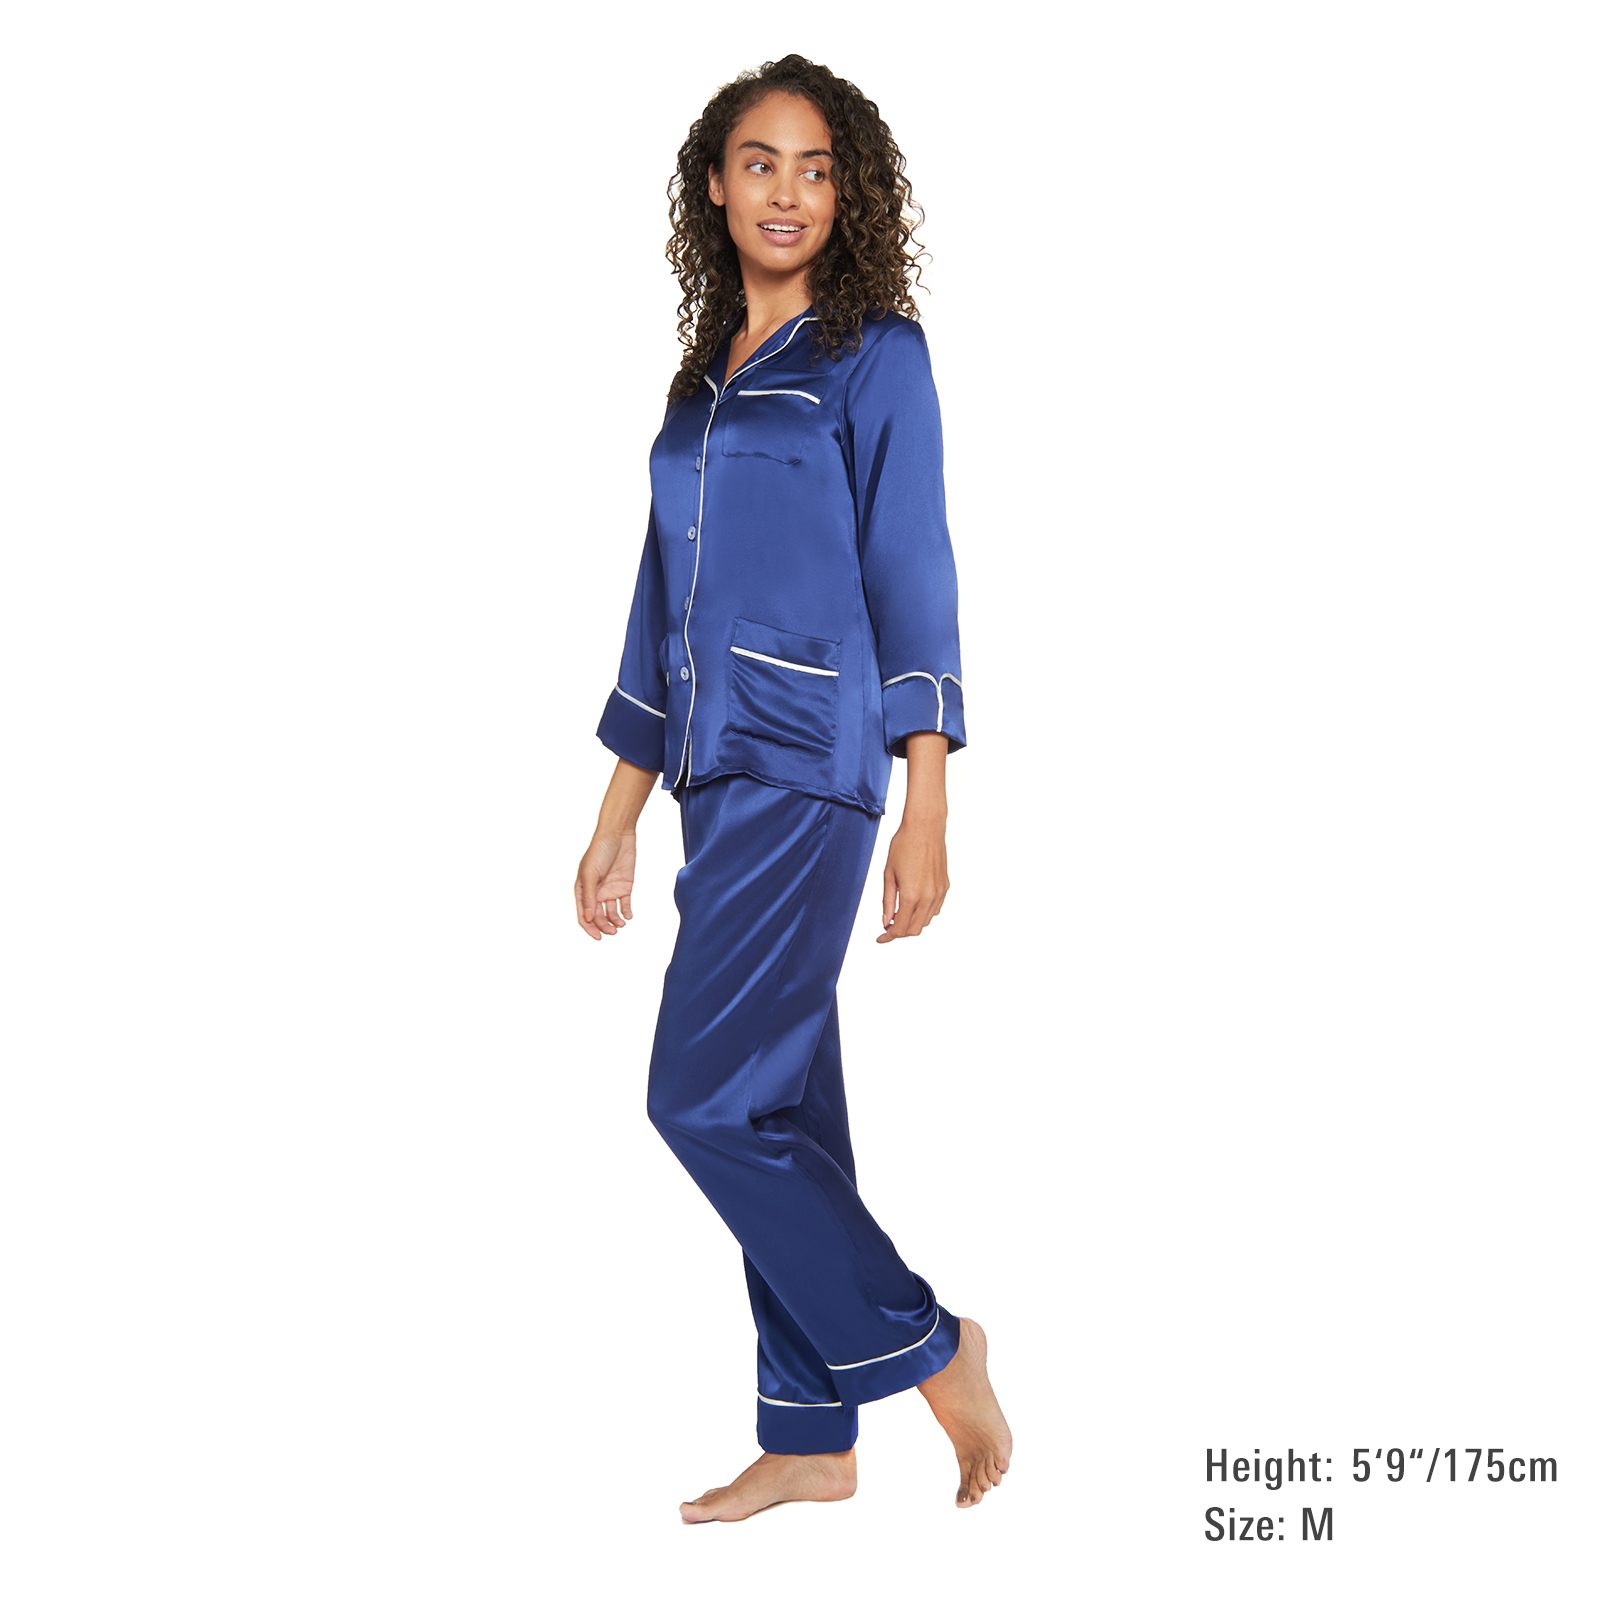 Classic Blue Stripe Pyjama Set - For Her from The Luxe Company UK